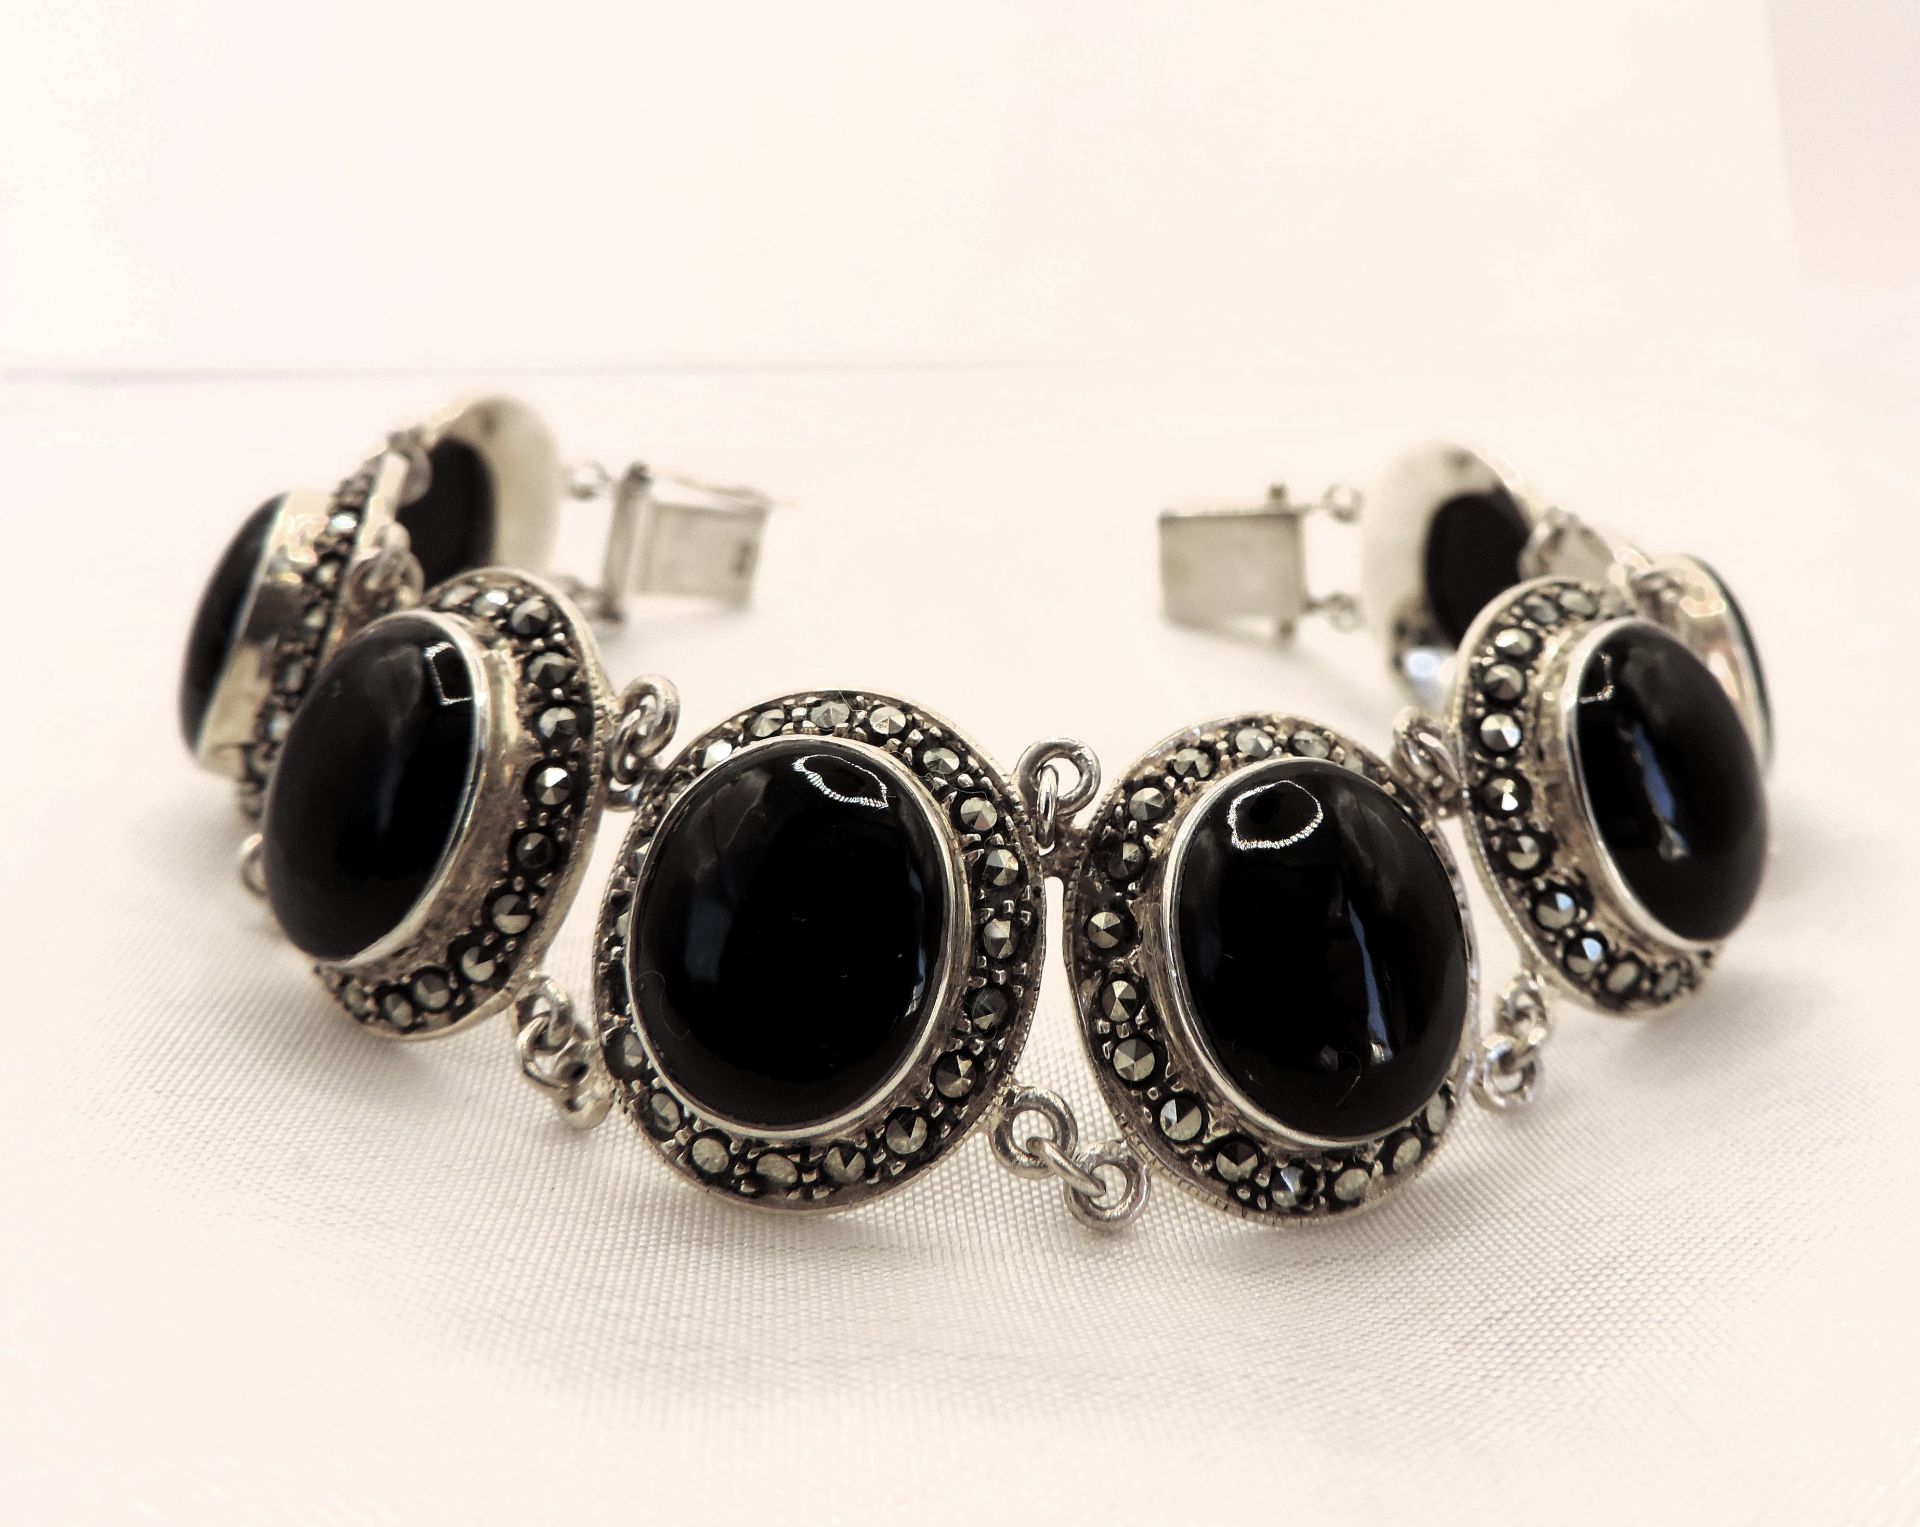 Vintage Sterling Silver Black Onyx & Marcasite Bracelet with Gift Box - Image 4 of 5